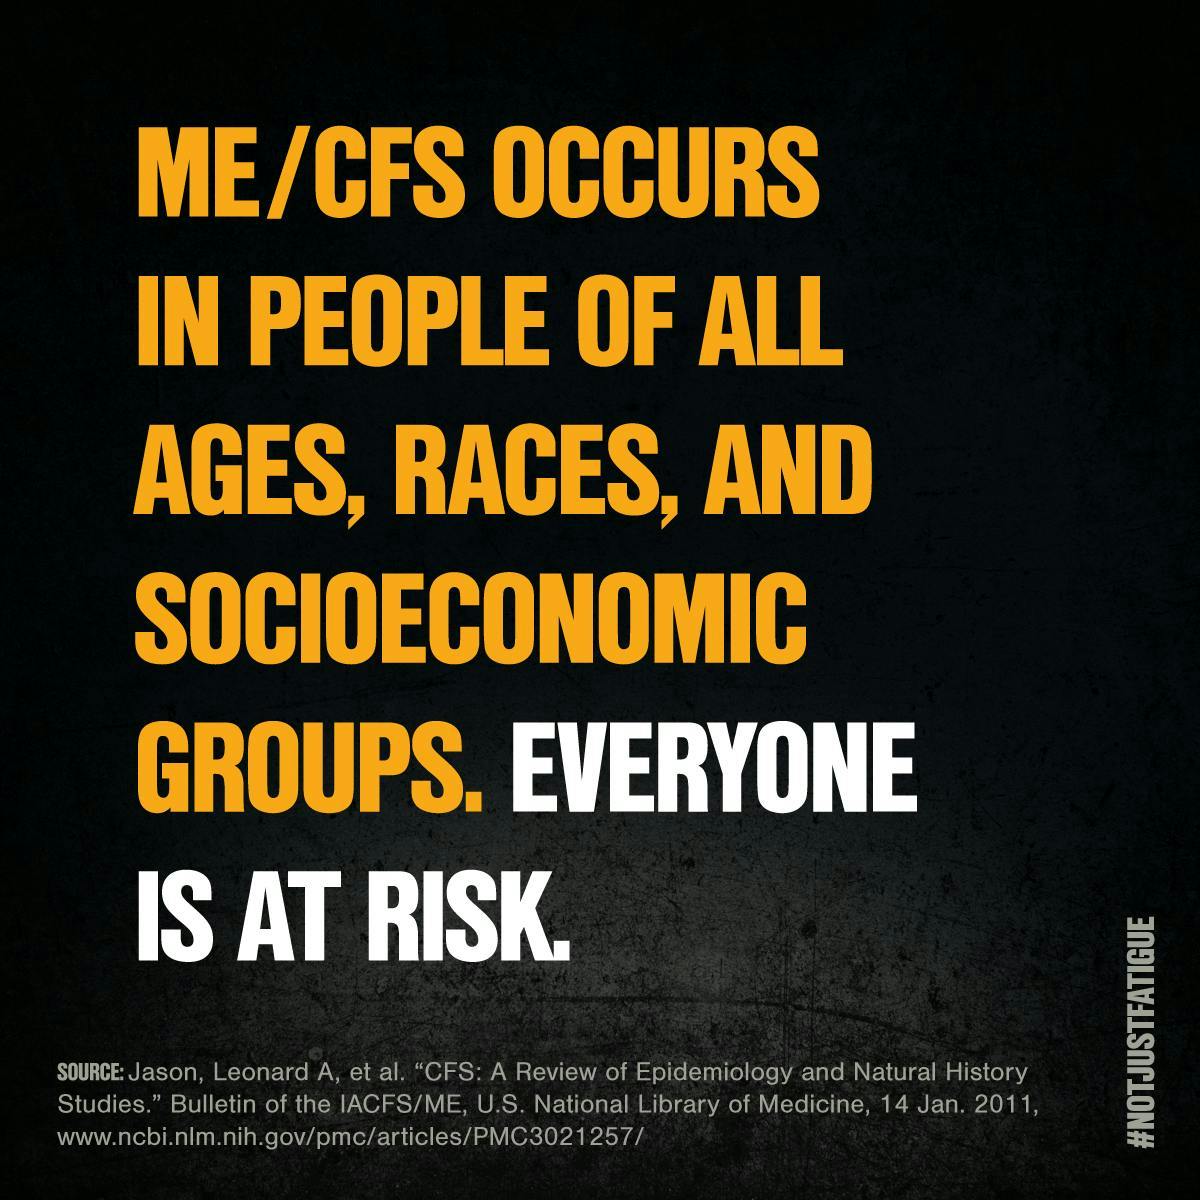 ME/CFS occurs in people of all ages, races, and socioeconomic groups. Everyone is at risk.